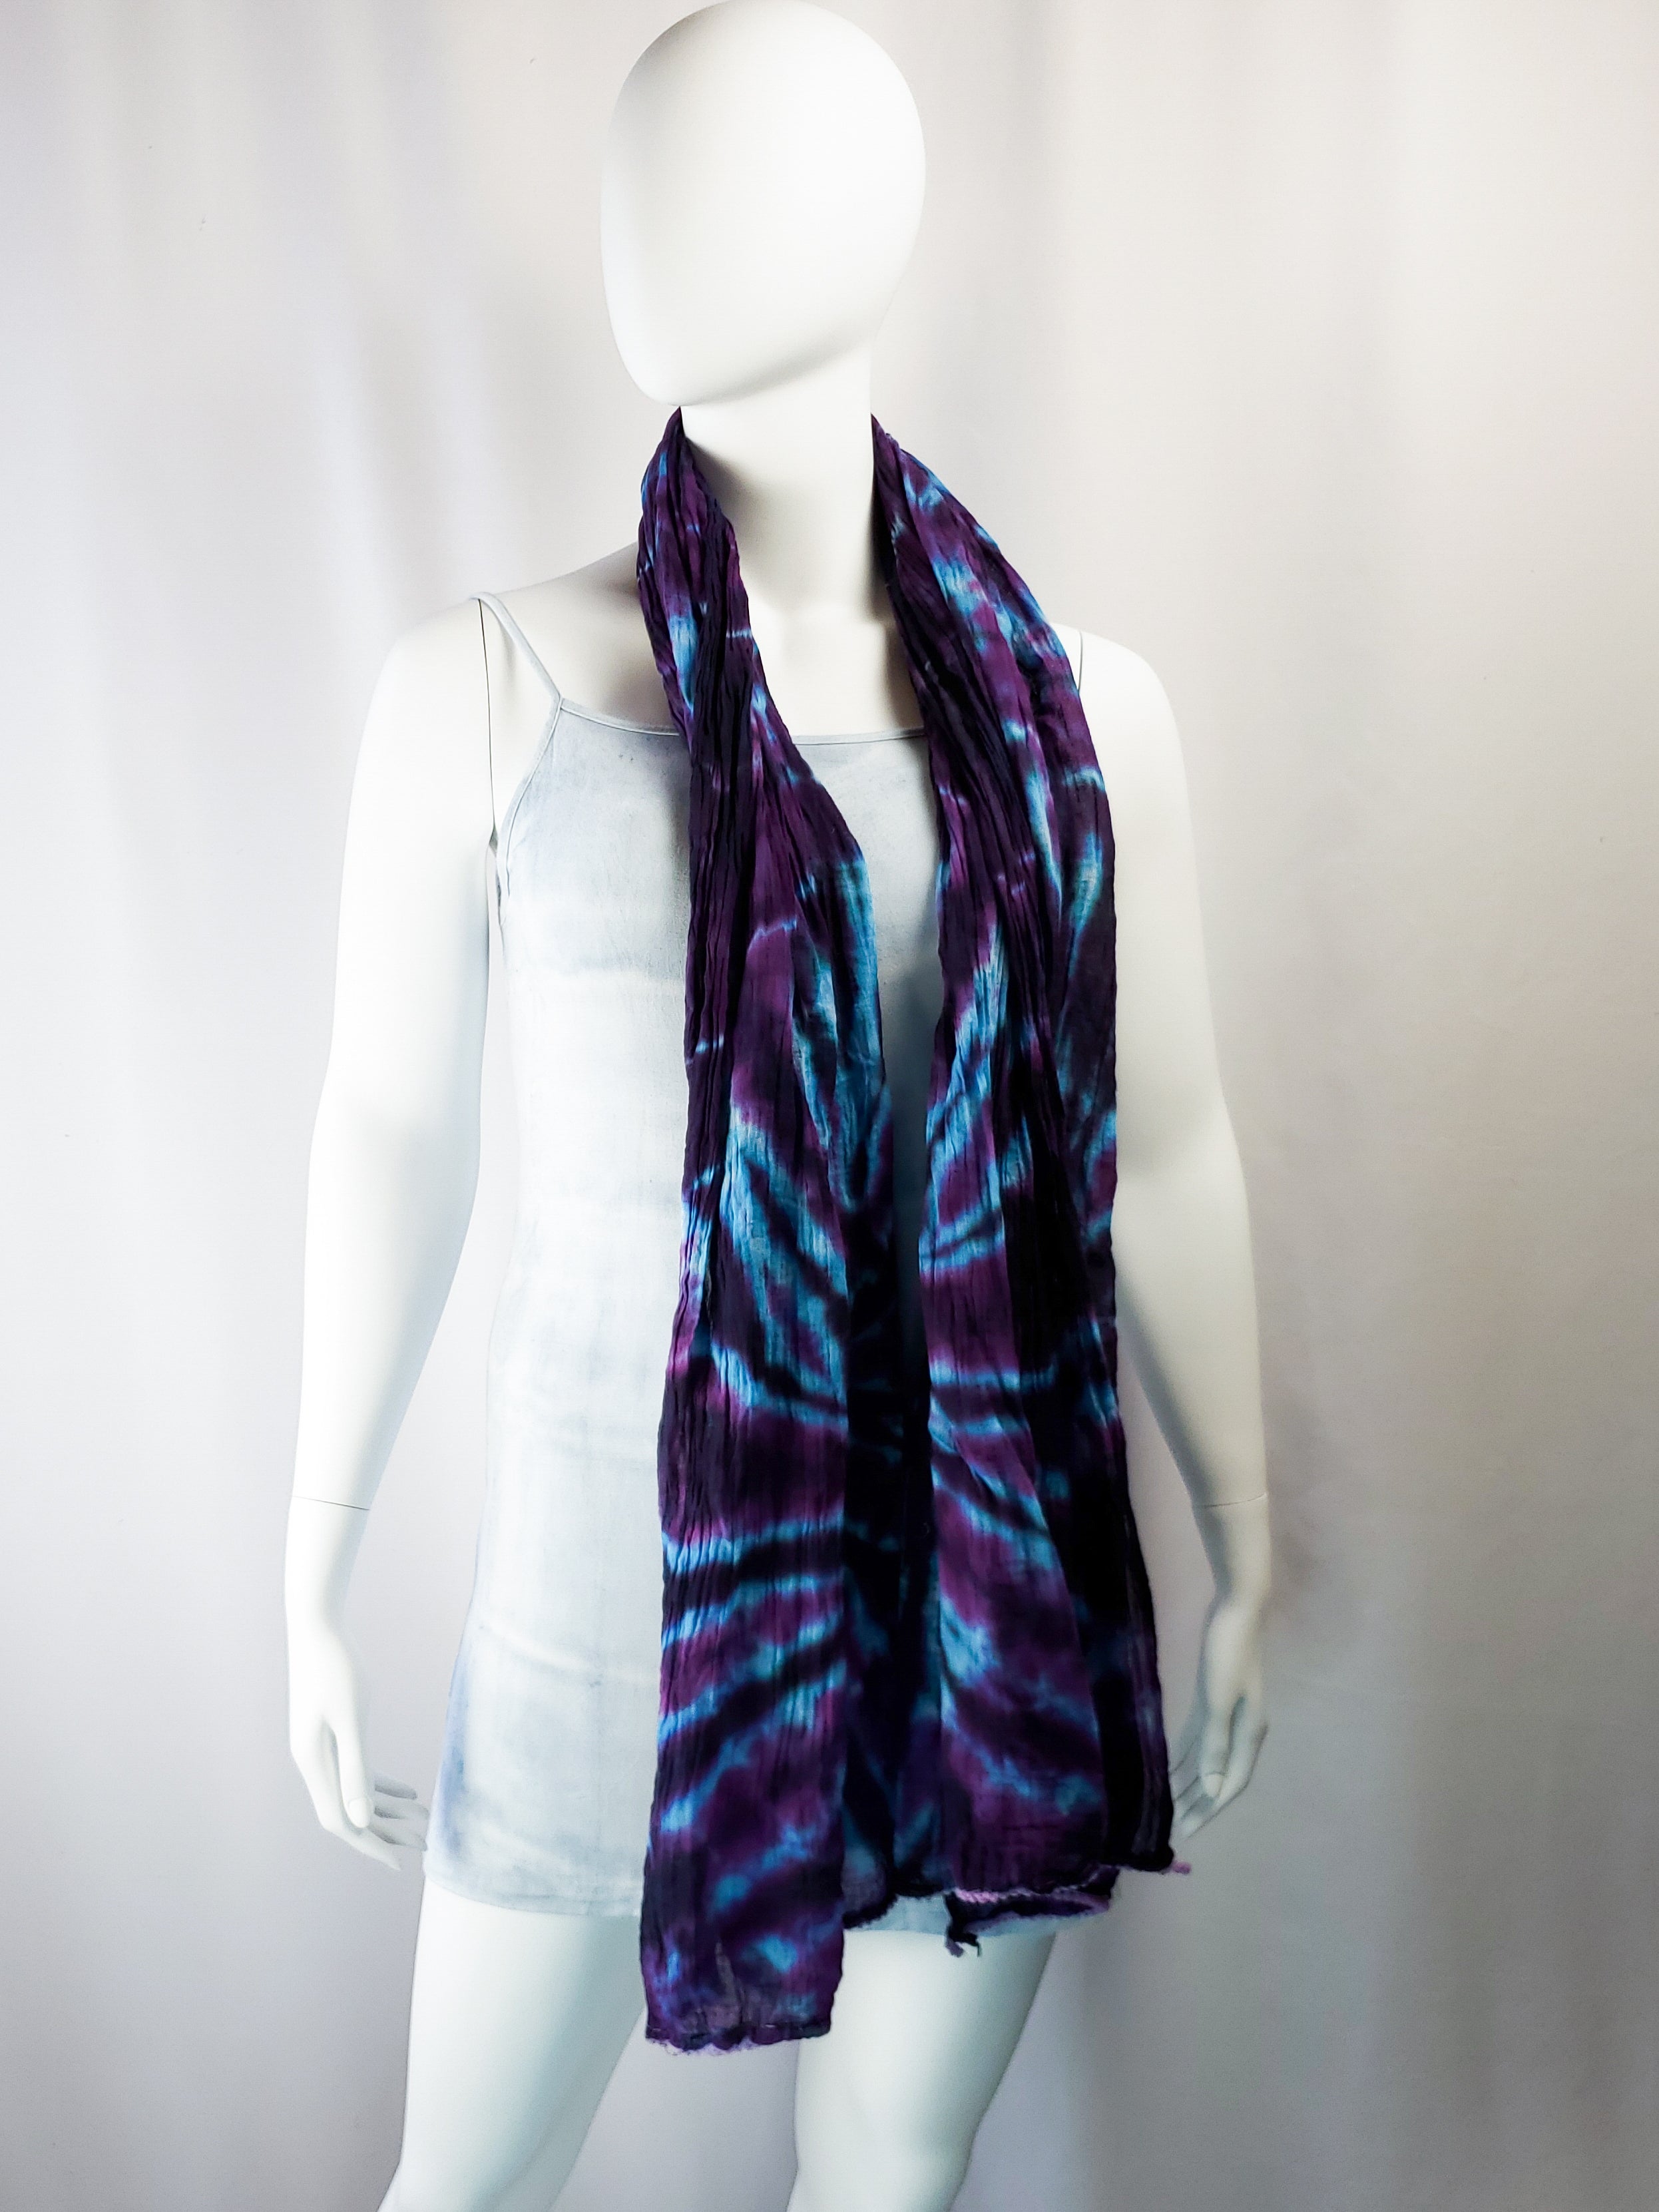 Purple and Peacock Spider Dye Crinkle Bandhani Shawl/Scarf - The Caffeinated Raven